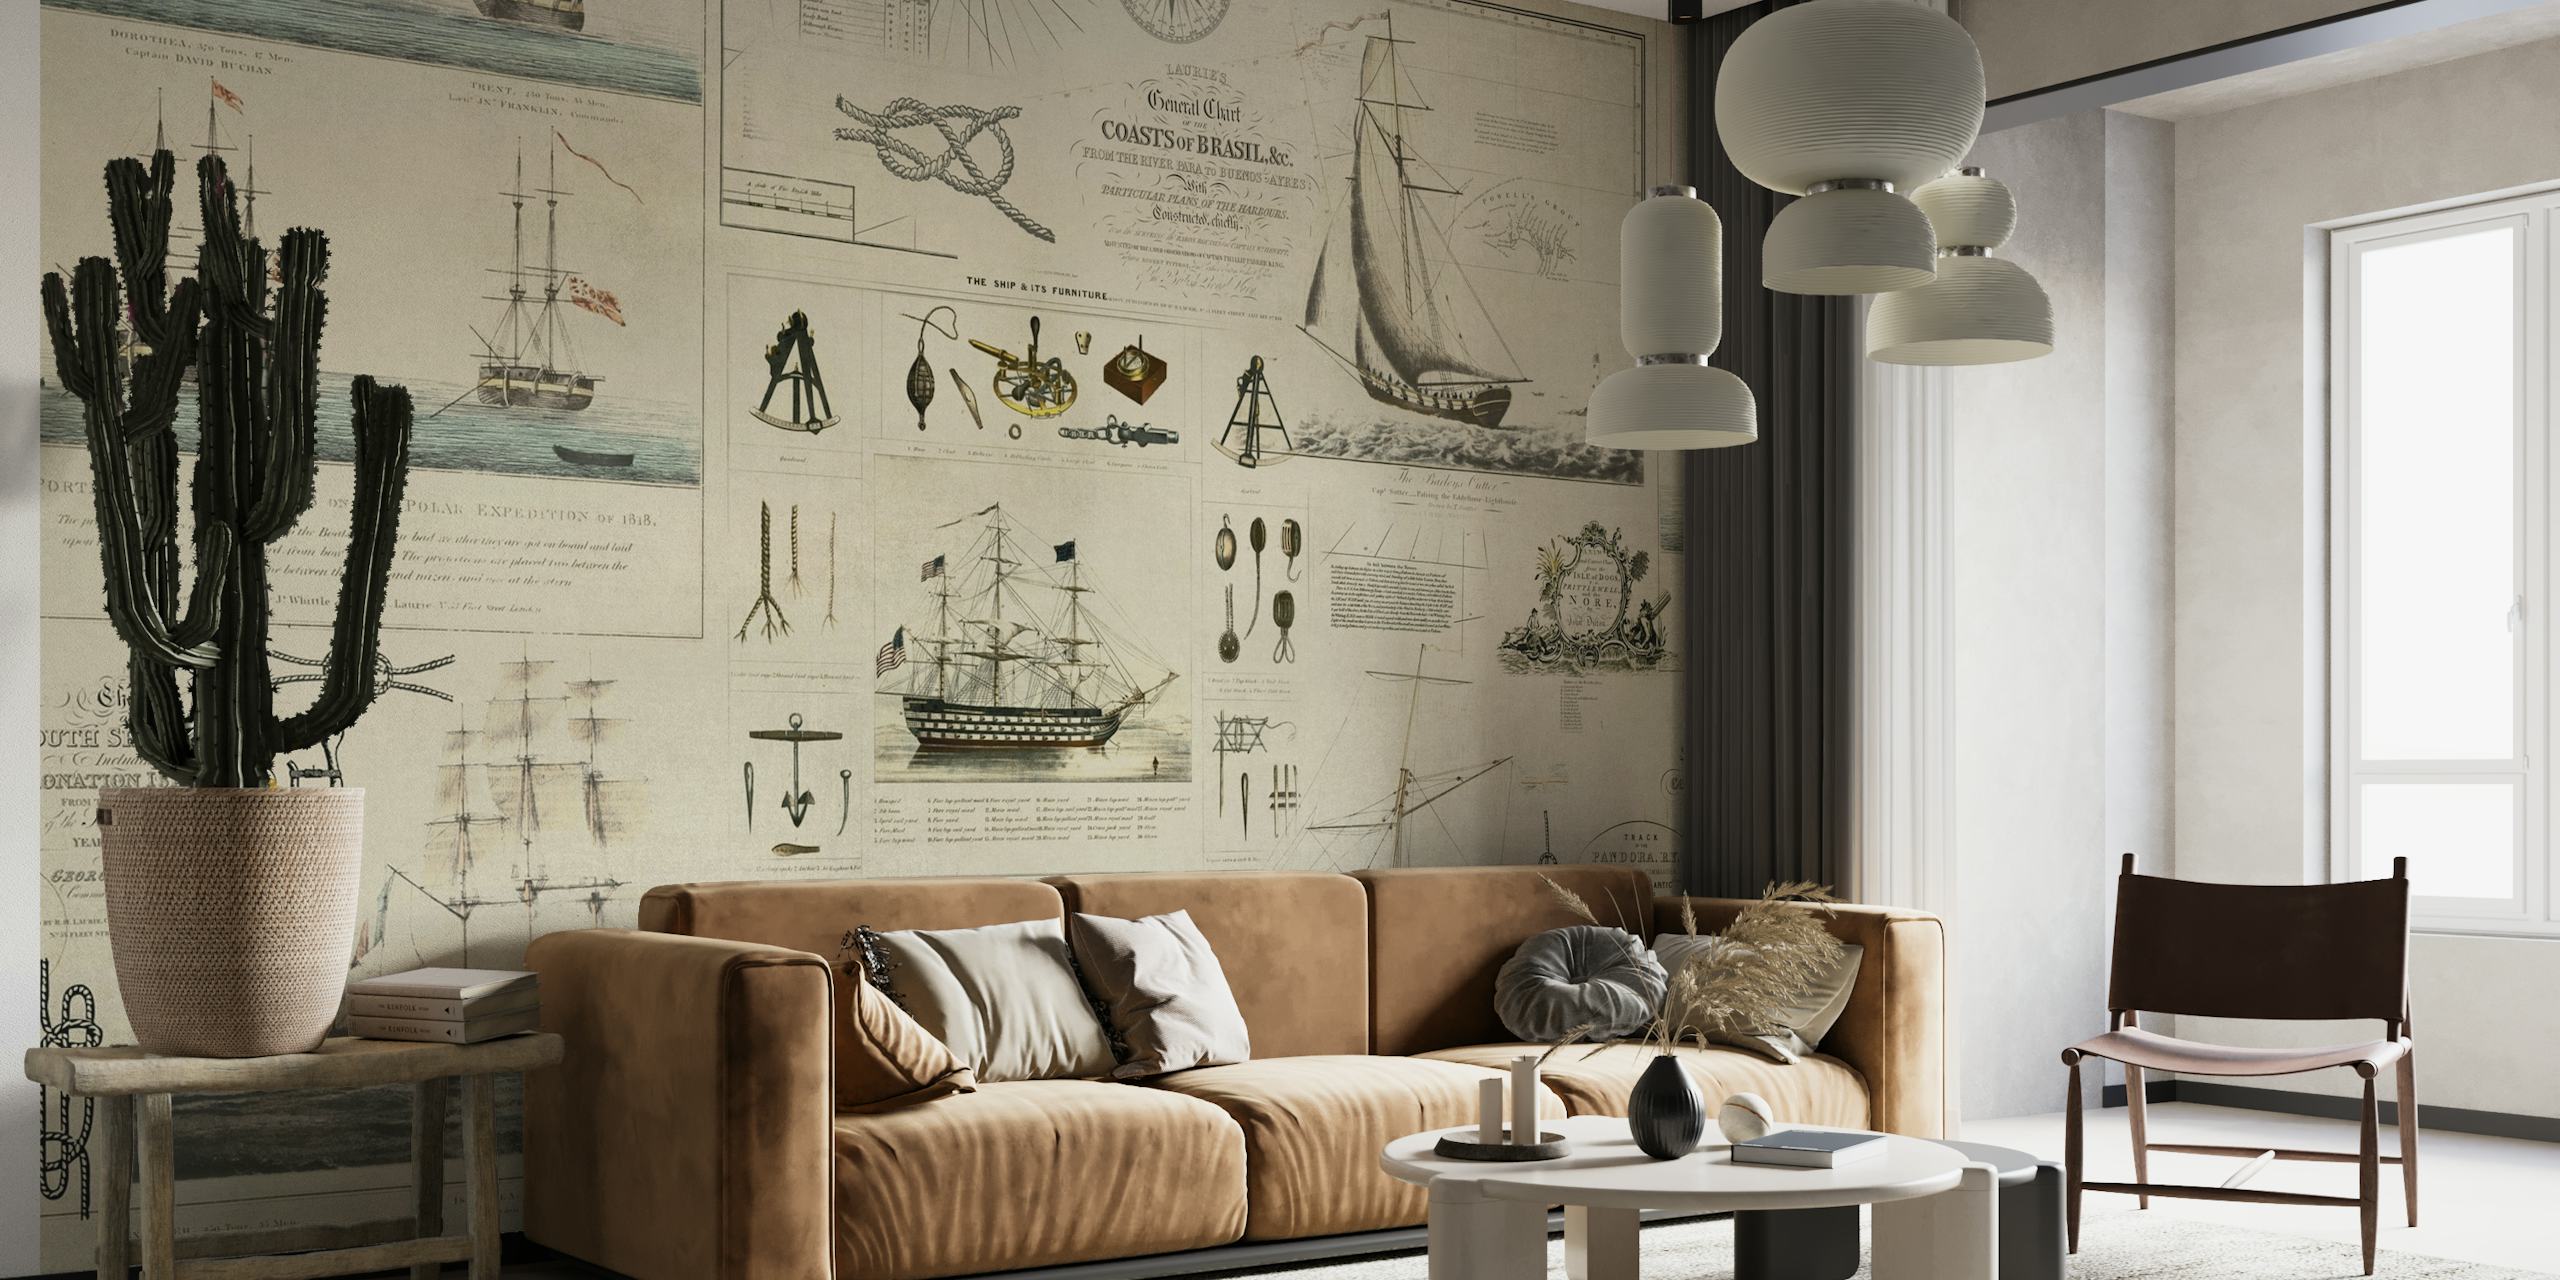 Nautical themed wallpaper with vintage ship drawings and book covers collage